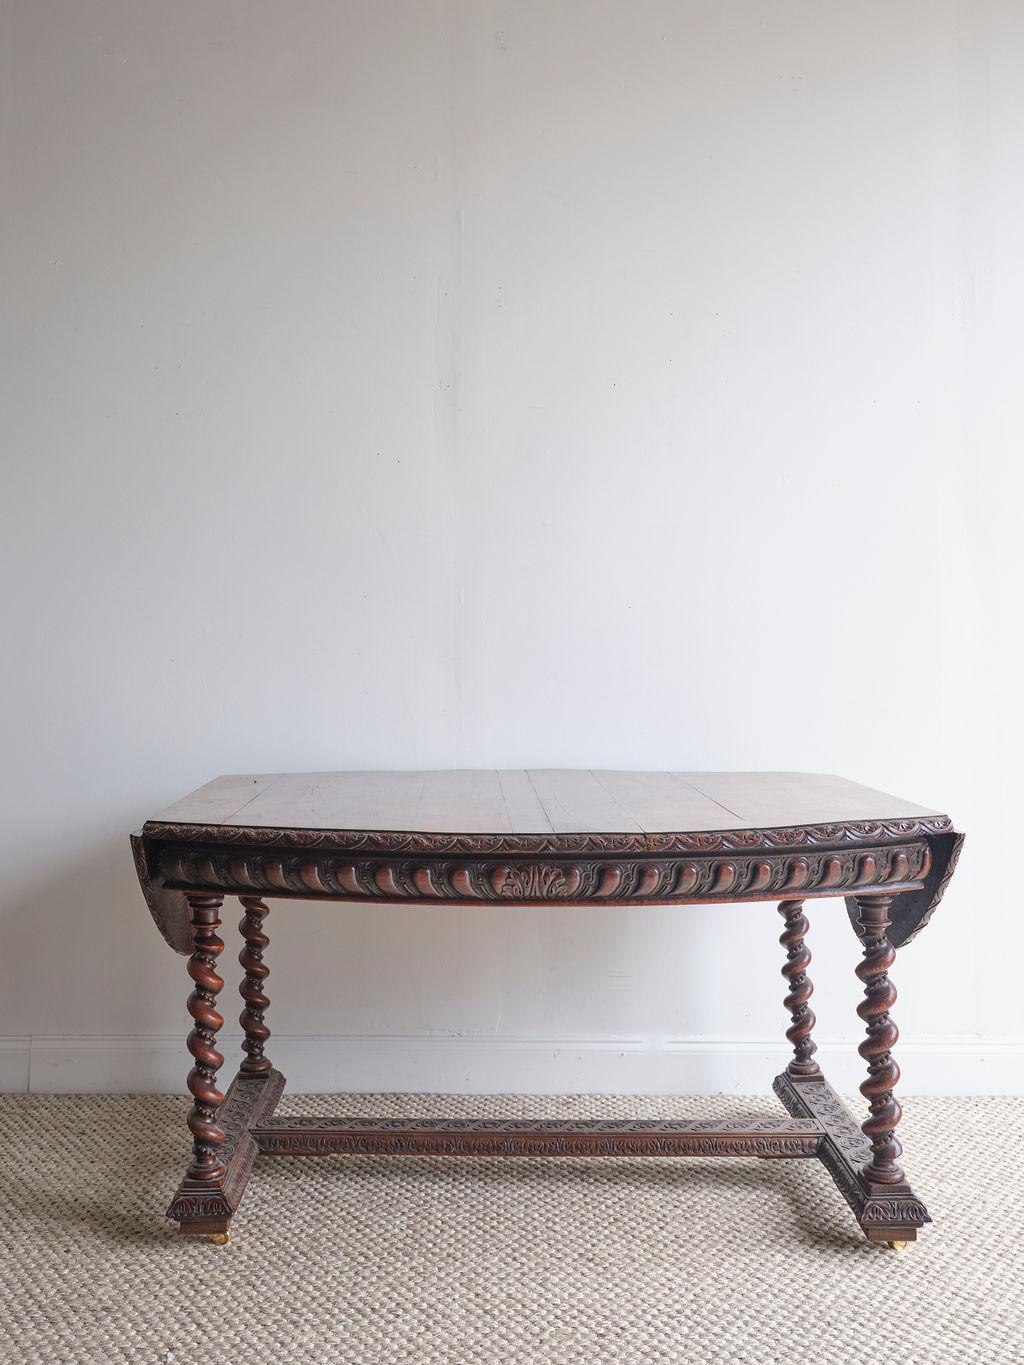 This lovely dark oak oval dining room table is a show stopper piece.. There are two drop-leaf ends to the table and four tuned legs that rest on the table base. There are wood carved details along the side of this table.